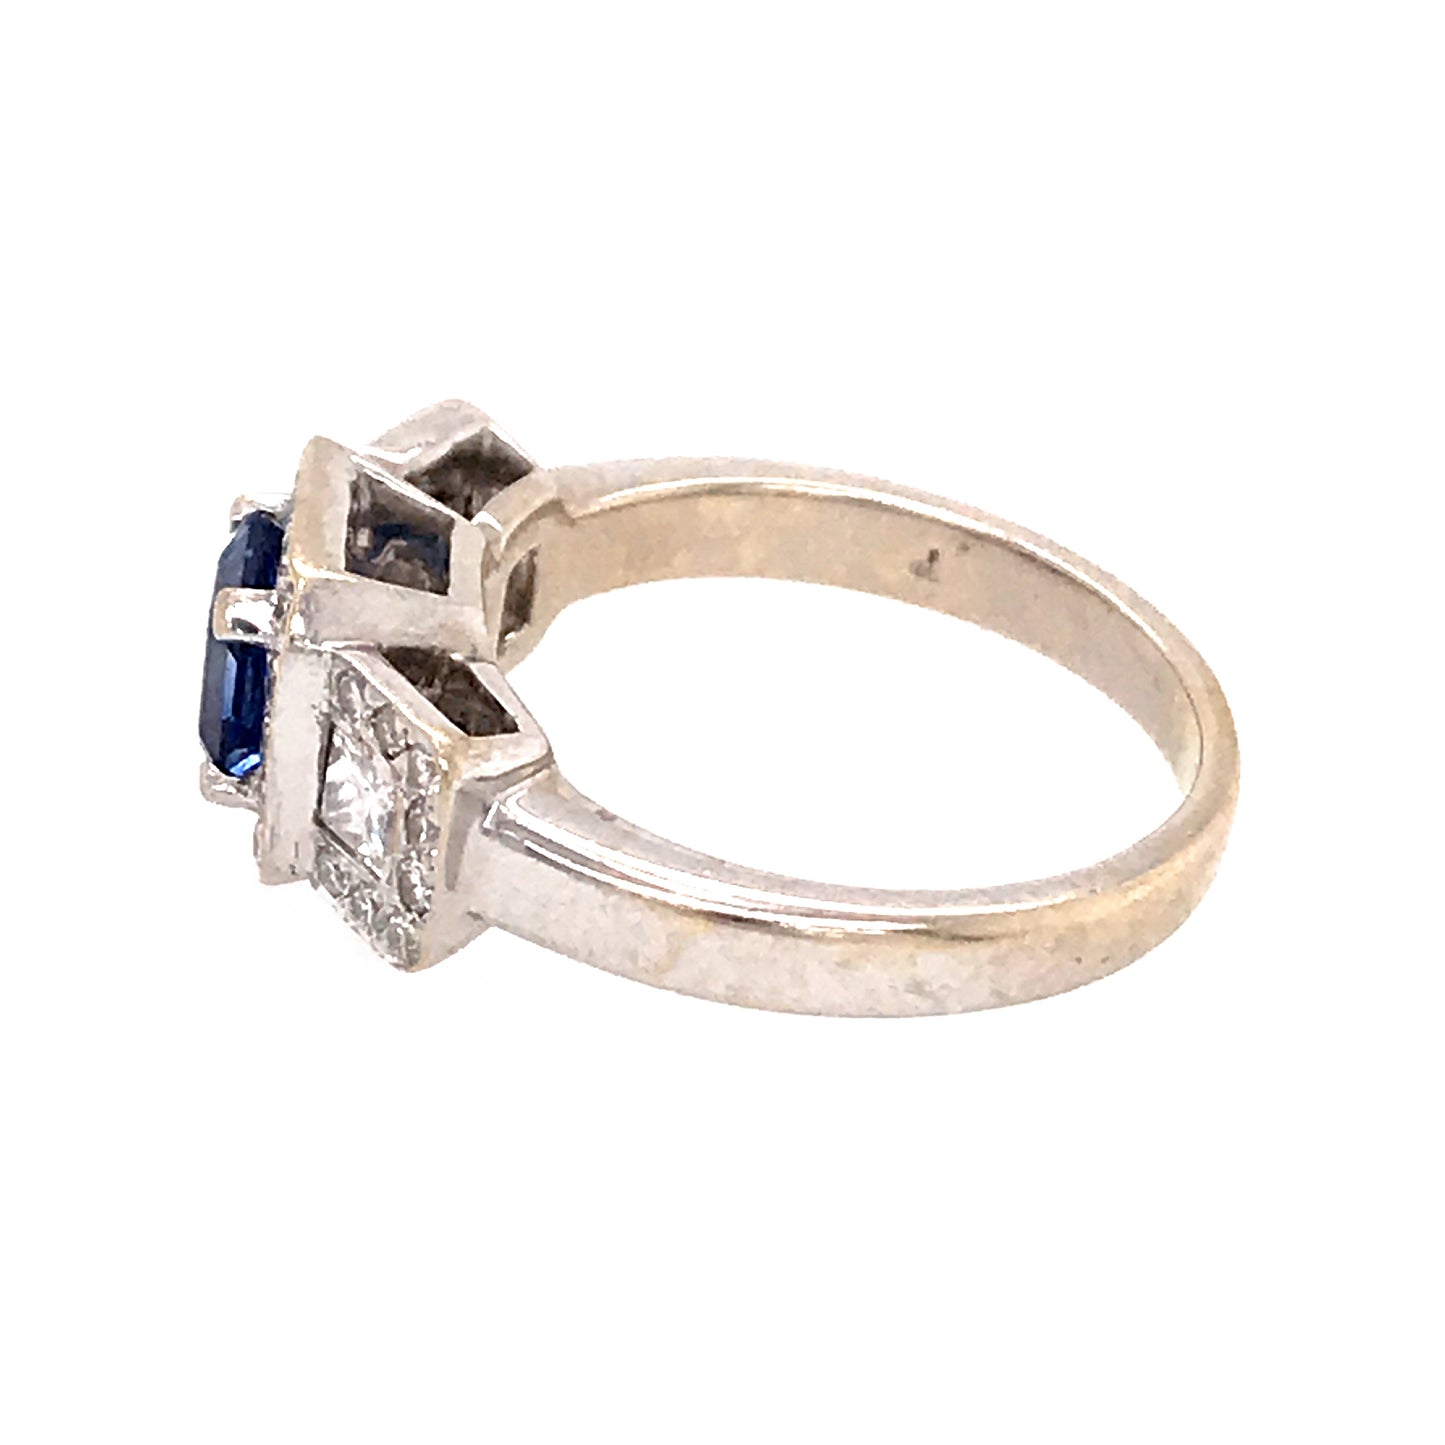 Estate 18k White Gold Sapphire and Diamond Cluster Ring